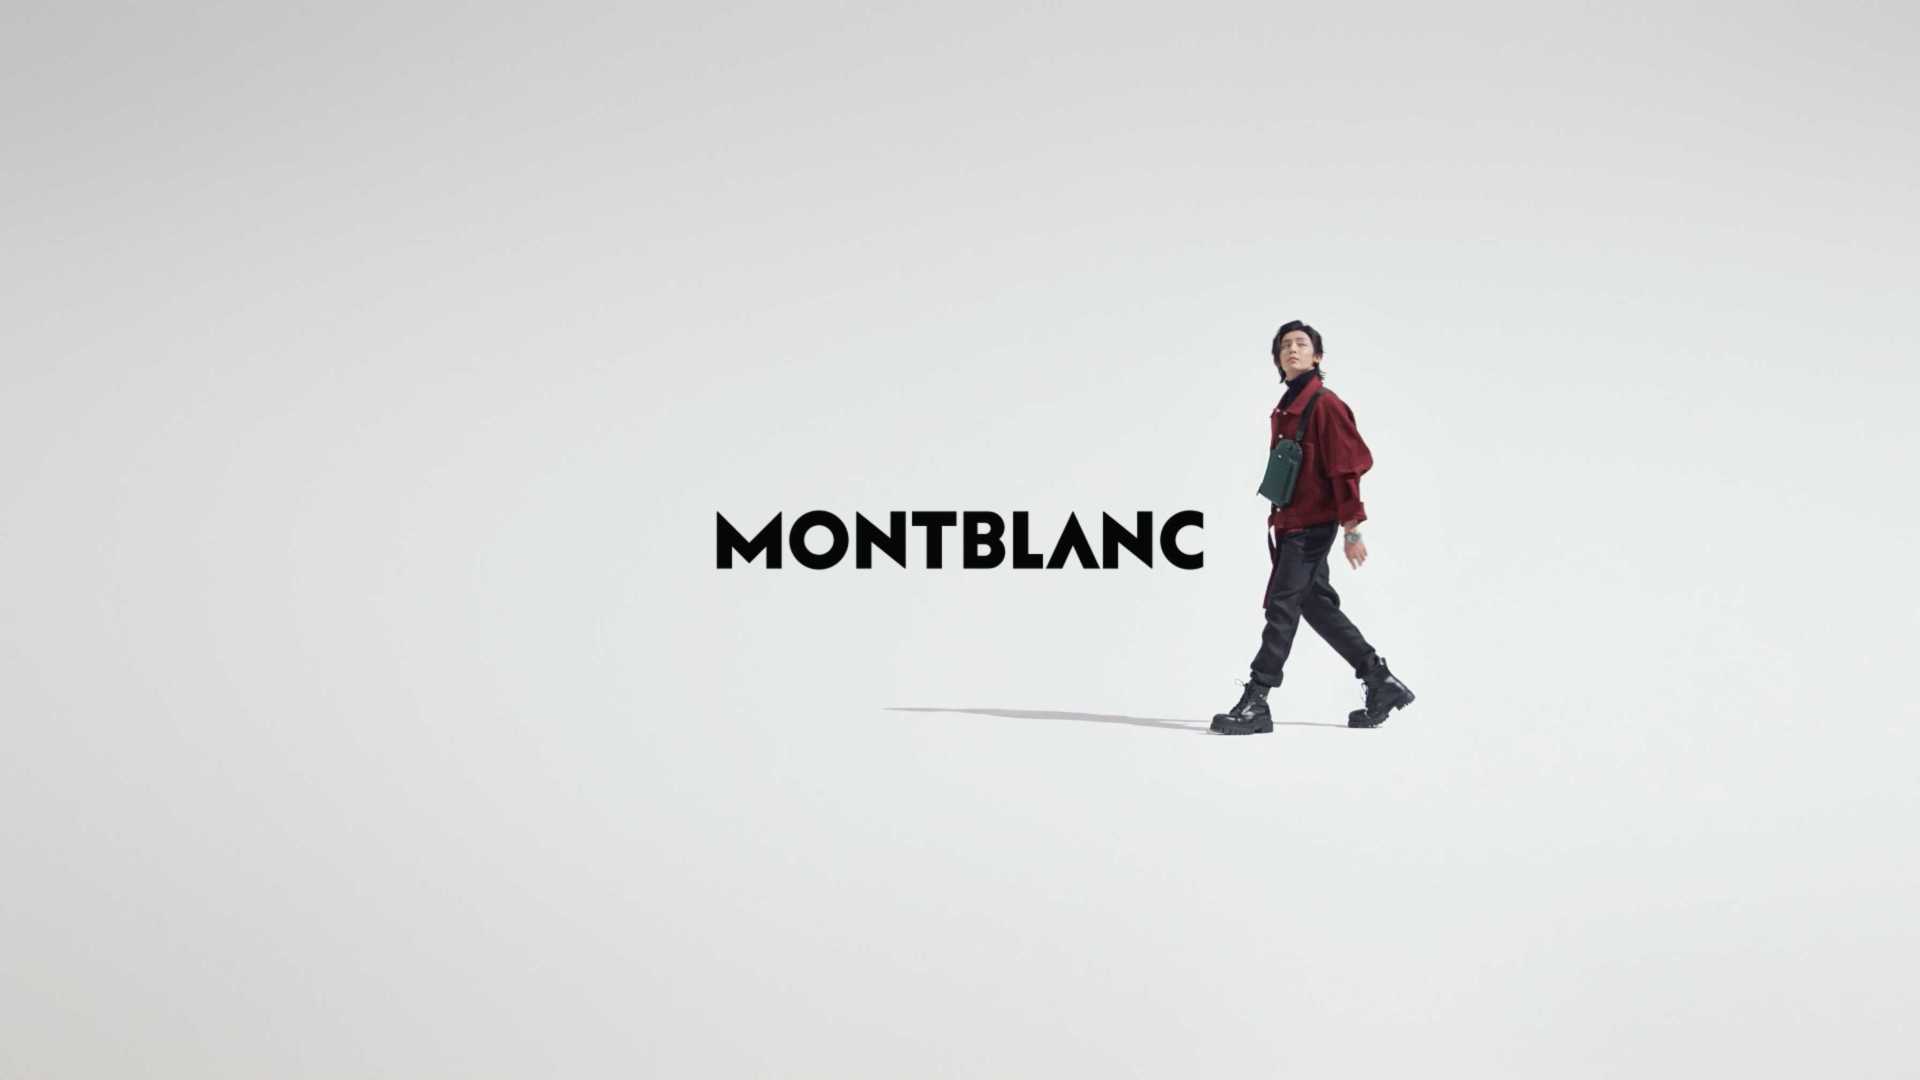 MONTBLANC - 《On The Move》x 侯明昊